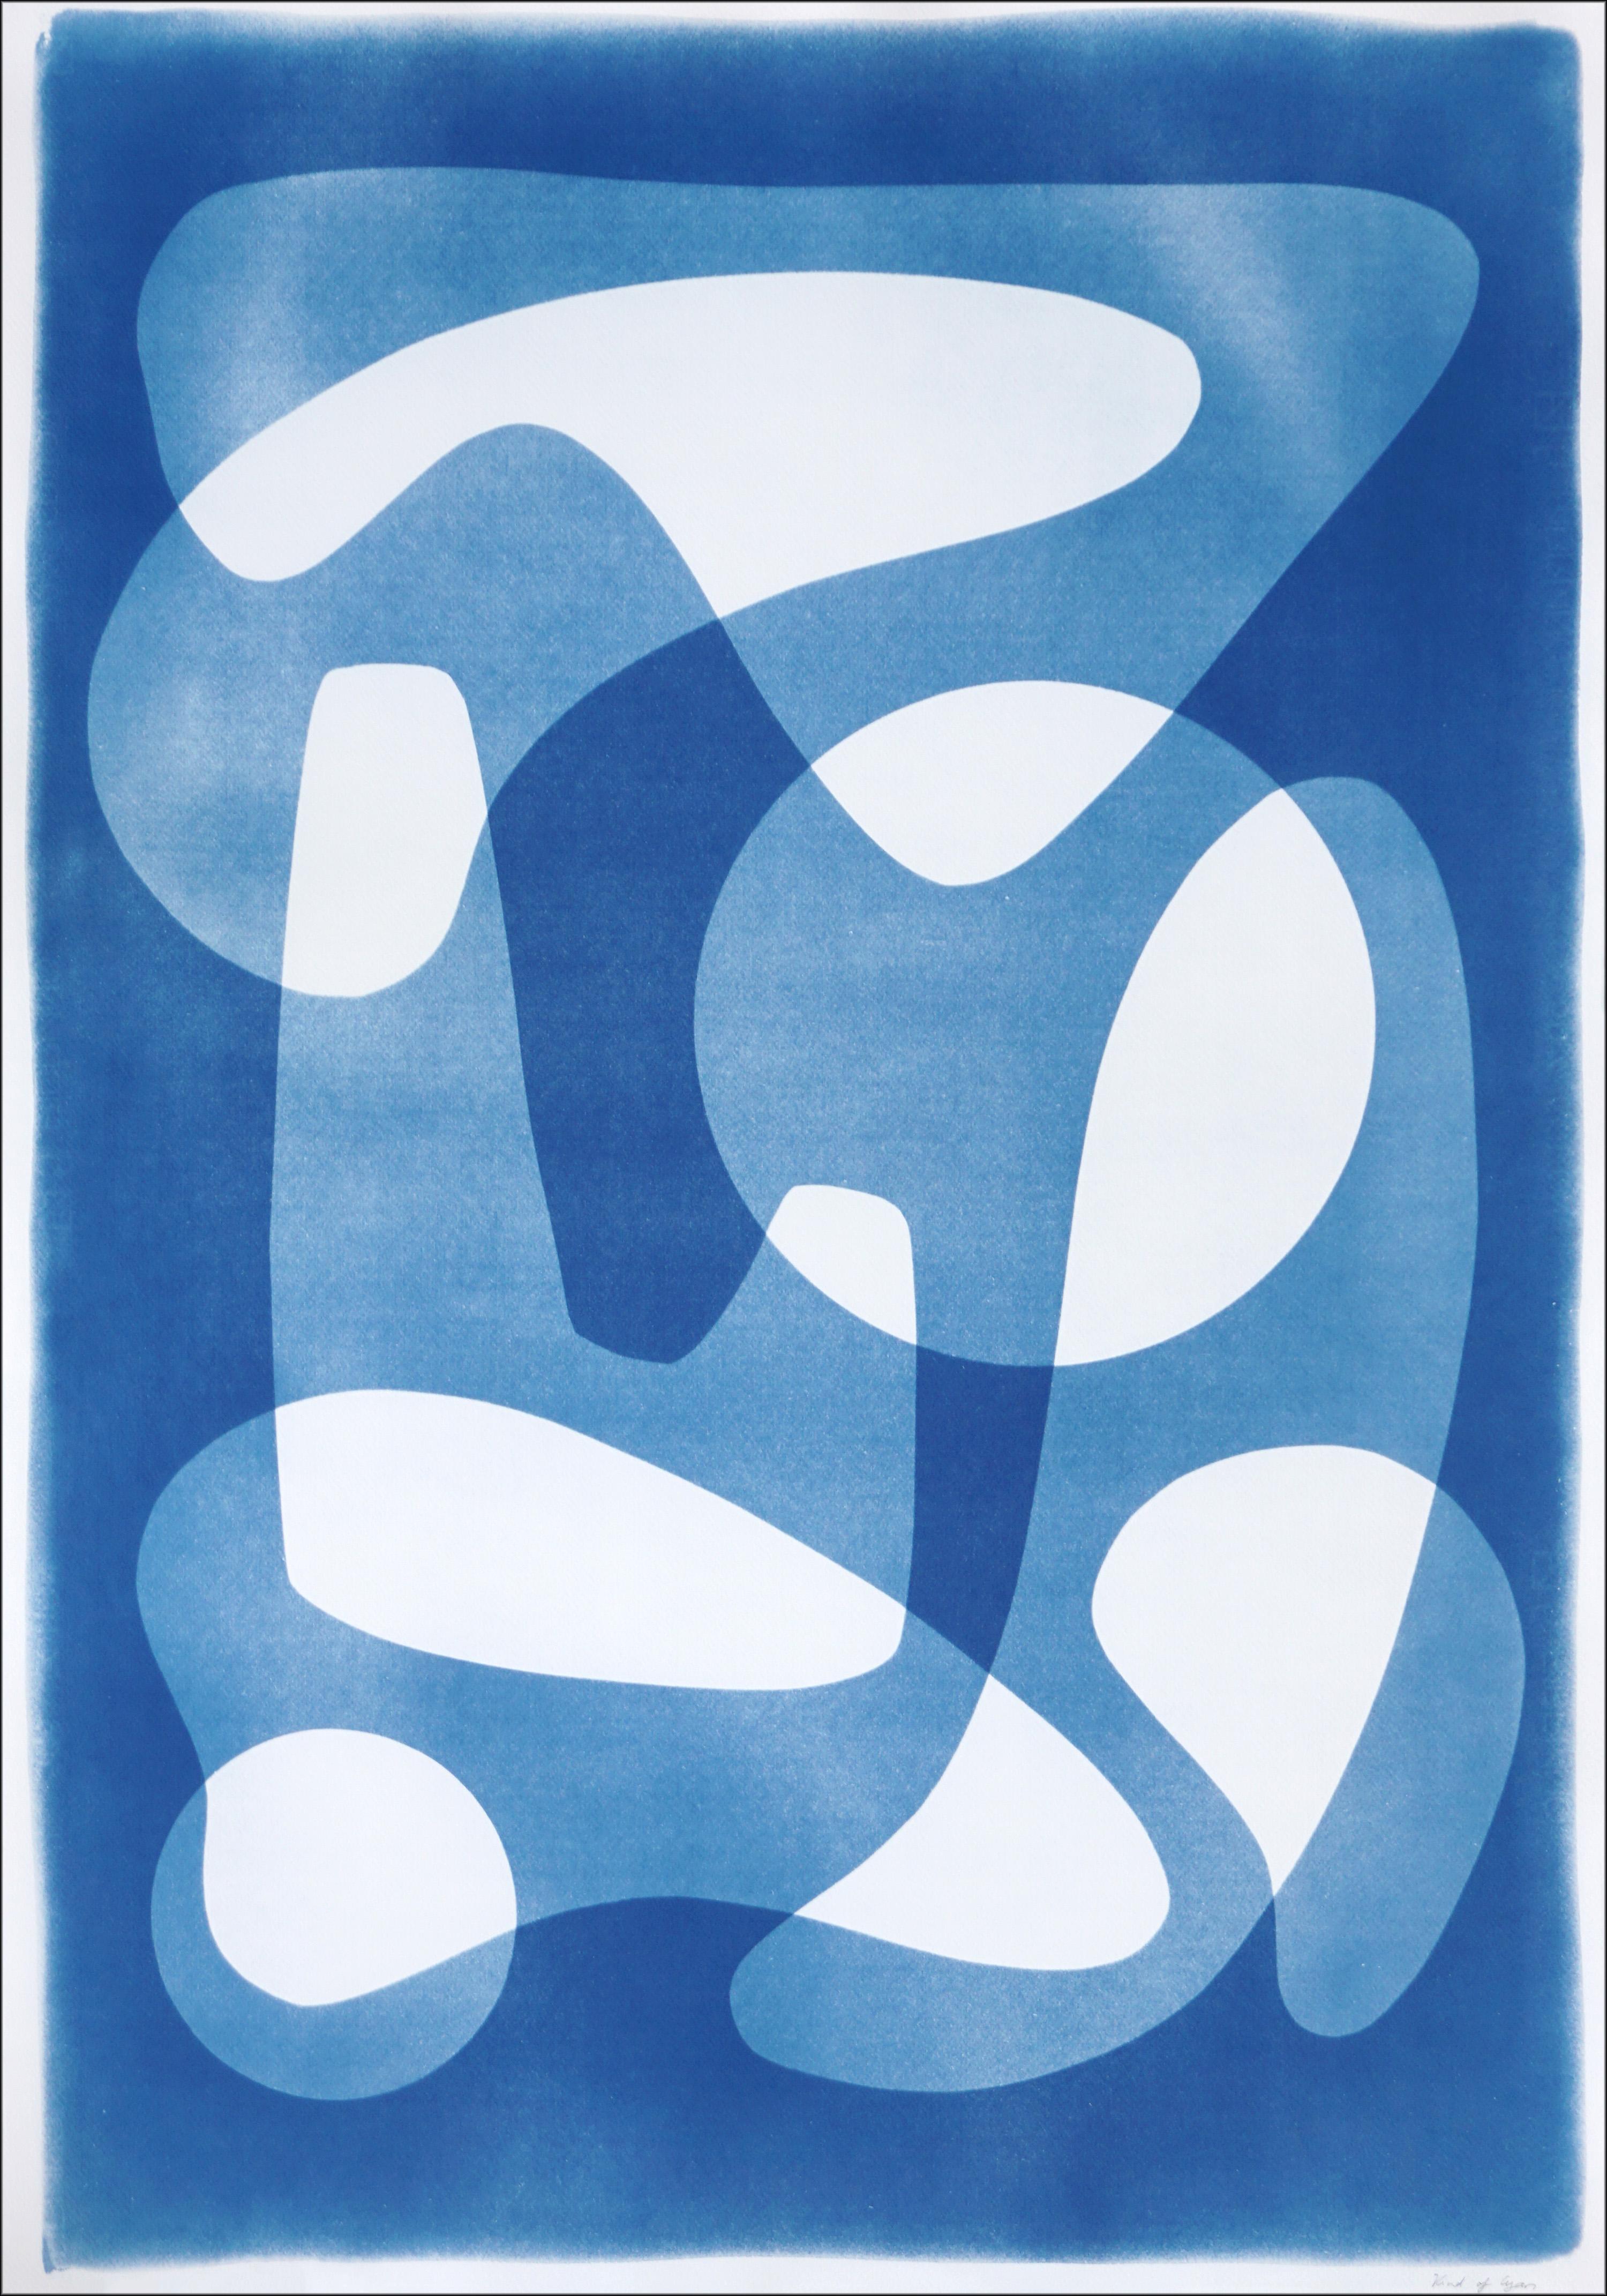 Handmade Cyanotype in White and Blue, Mid Century Modern Abstract Shapes, Paper